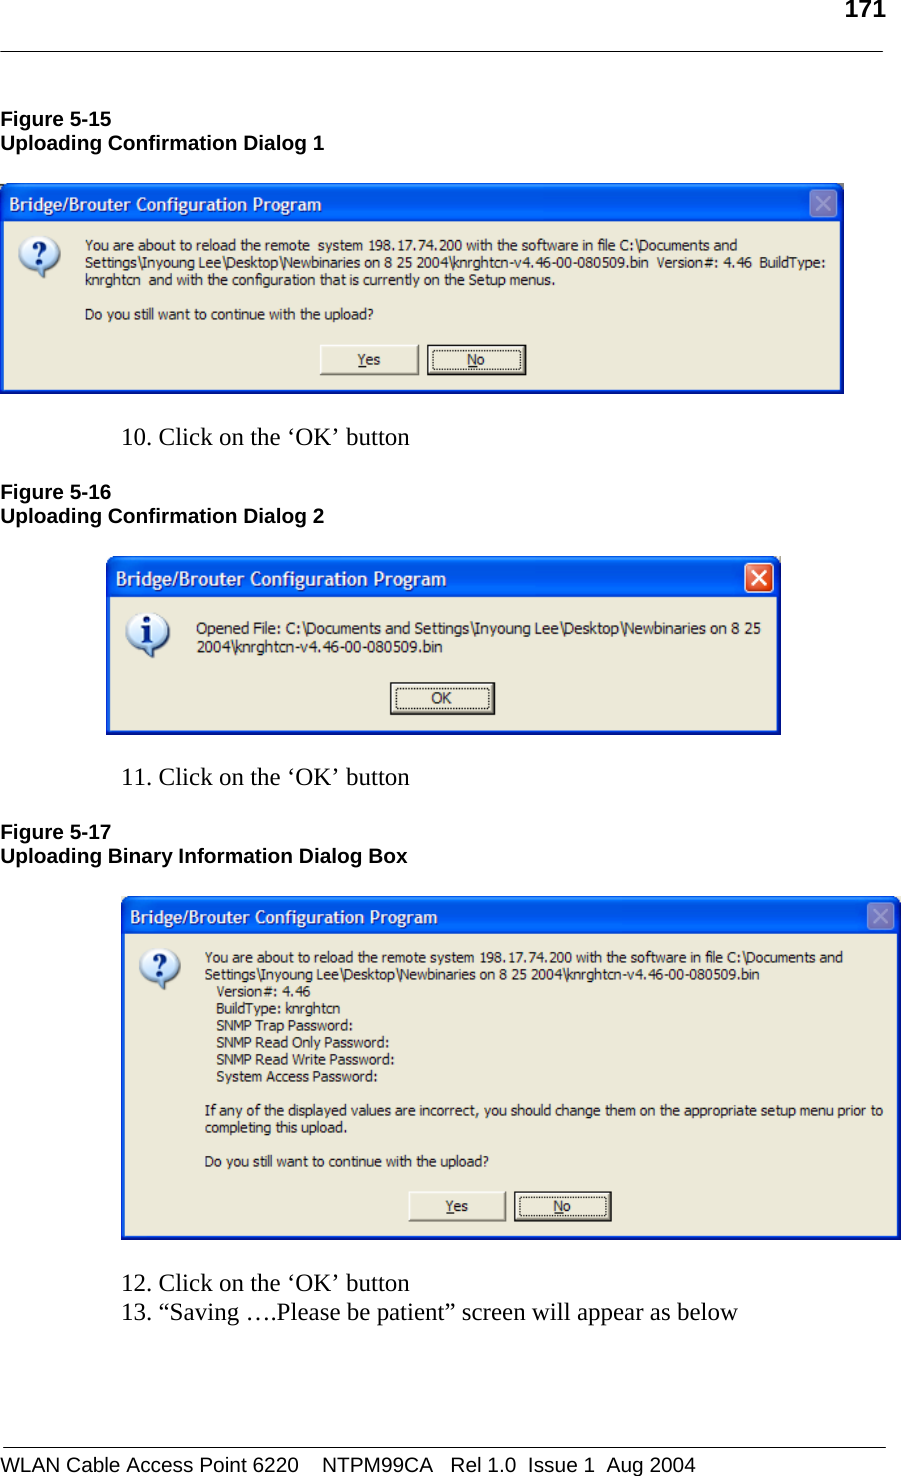   171  Figure 5-15 Uploading Confirmation Dialog 1    10. Click on the ‘OK’ button   Figure 5-16 Uploading Confirmation Dialog 2    11. Click on the ‘OK’ button   Figure 5-17 Uploading Binary Information Dialog Box    12. Click on the ‘OK’ button  13. “Saving ….Please be patient” screen will appear as below     WLAN Cable Access Point 6220    NTPM99CA   Rel 1.0  Issue 1  Aug 2004 